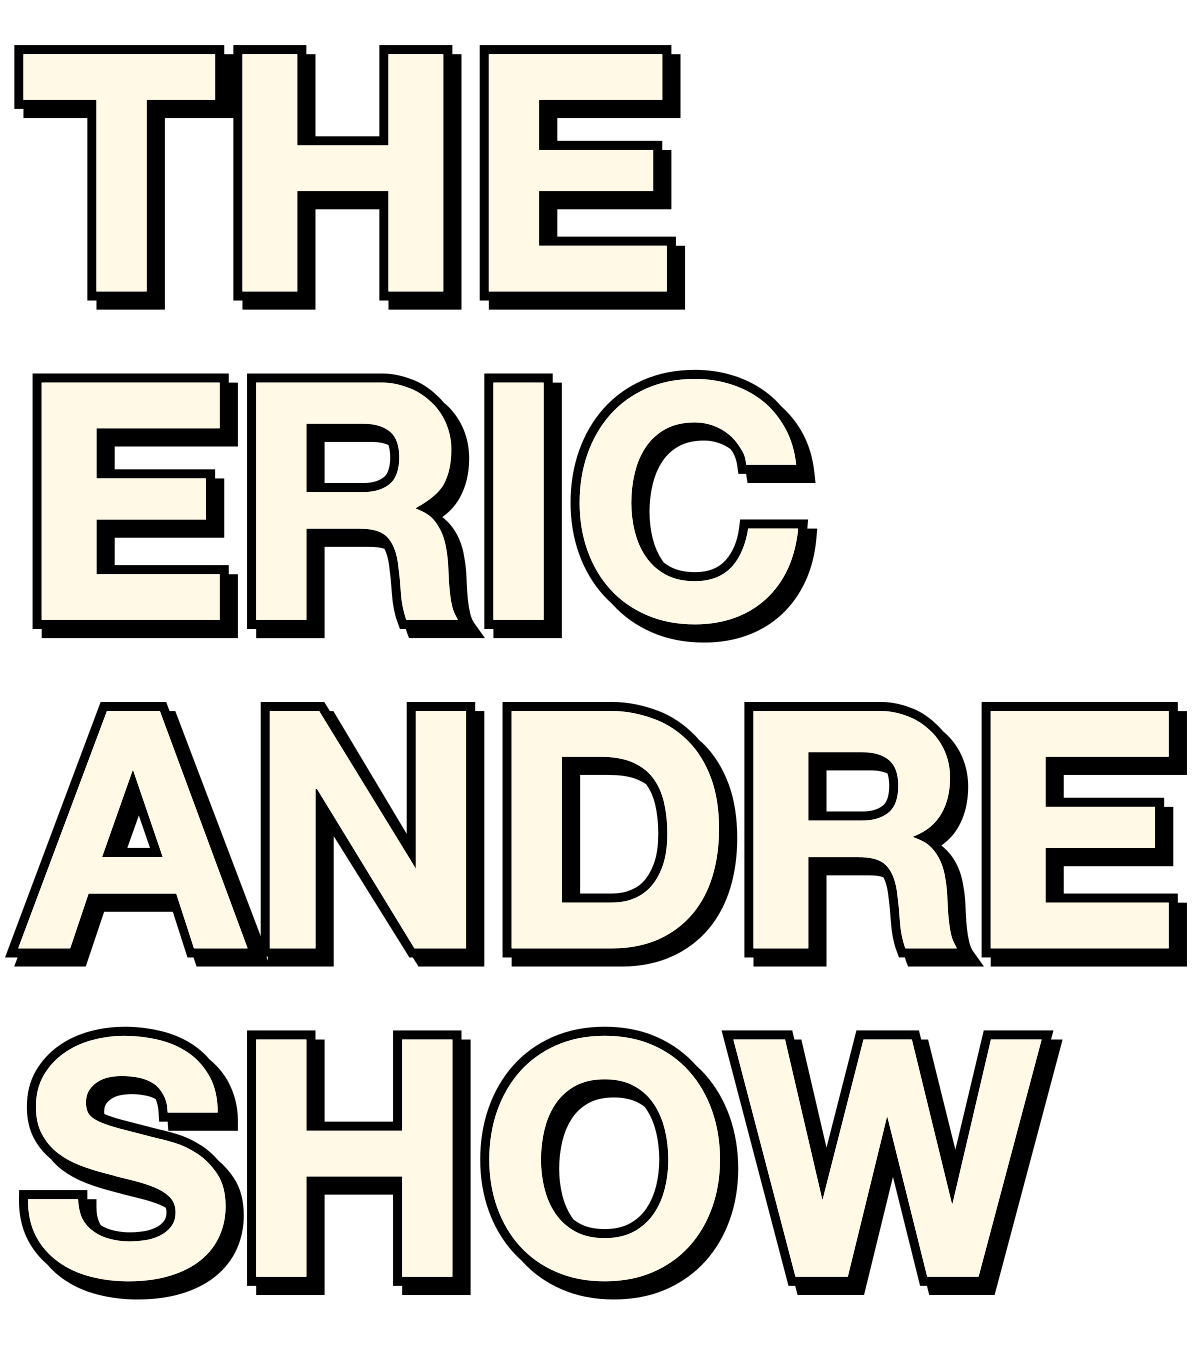 Eric andre show